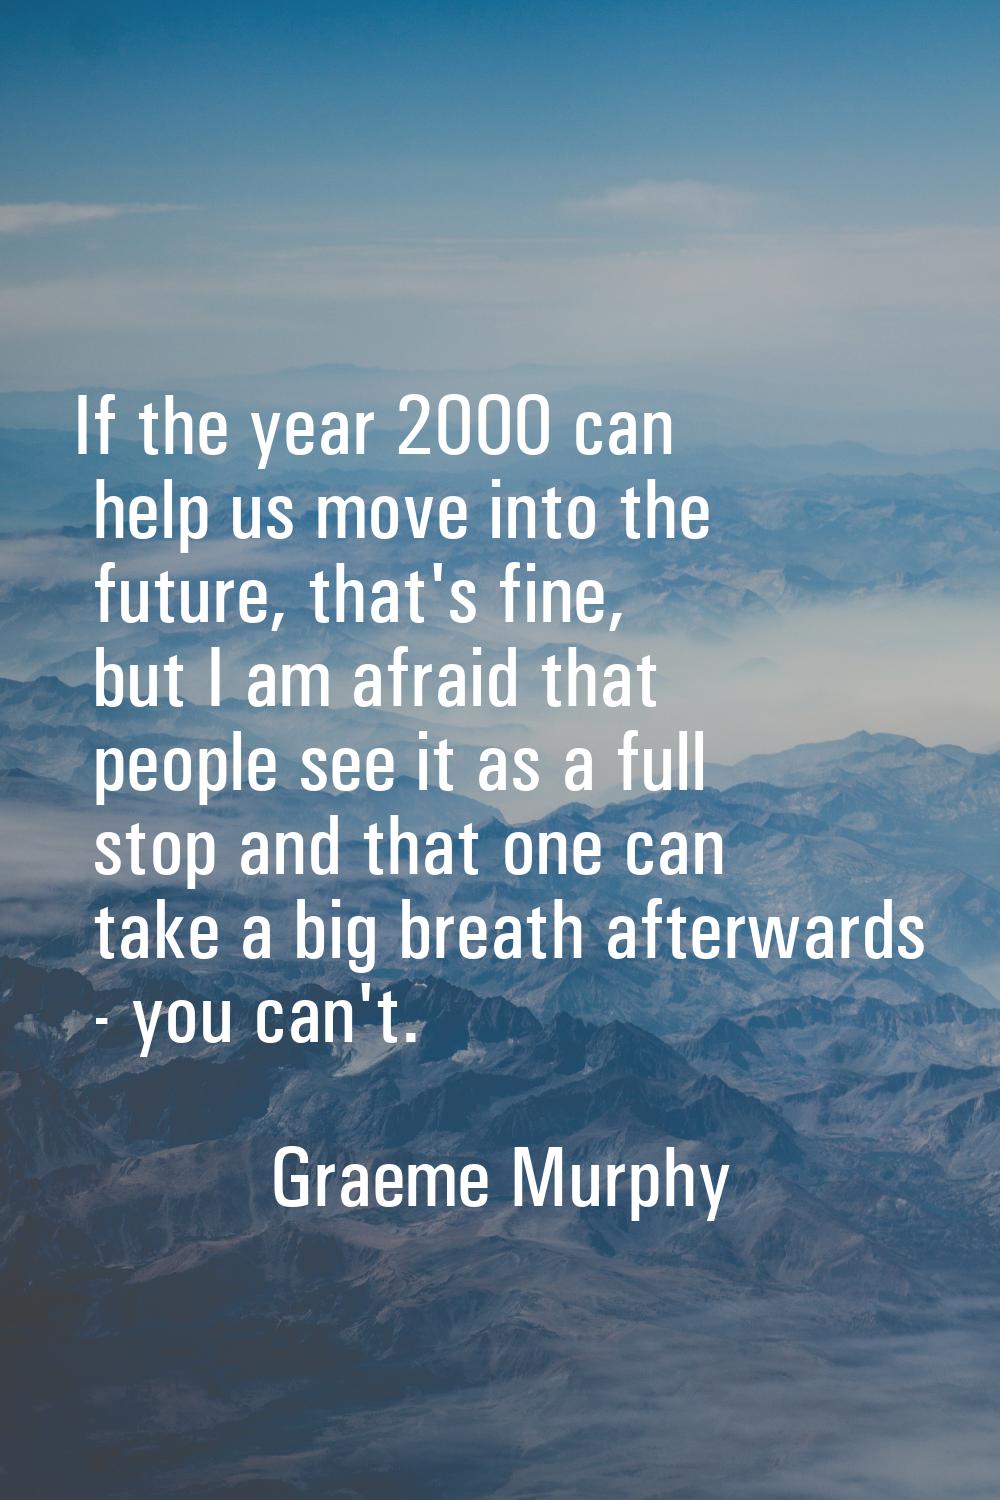 If the year 2000 can help us move into the future, that's fine, but I am afraid that people see it 